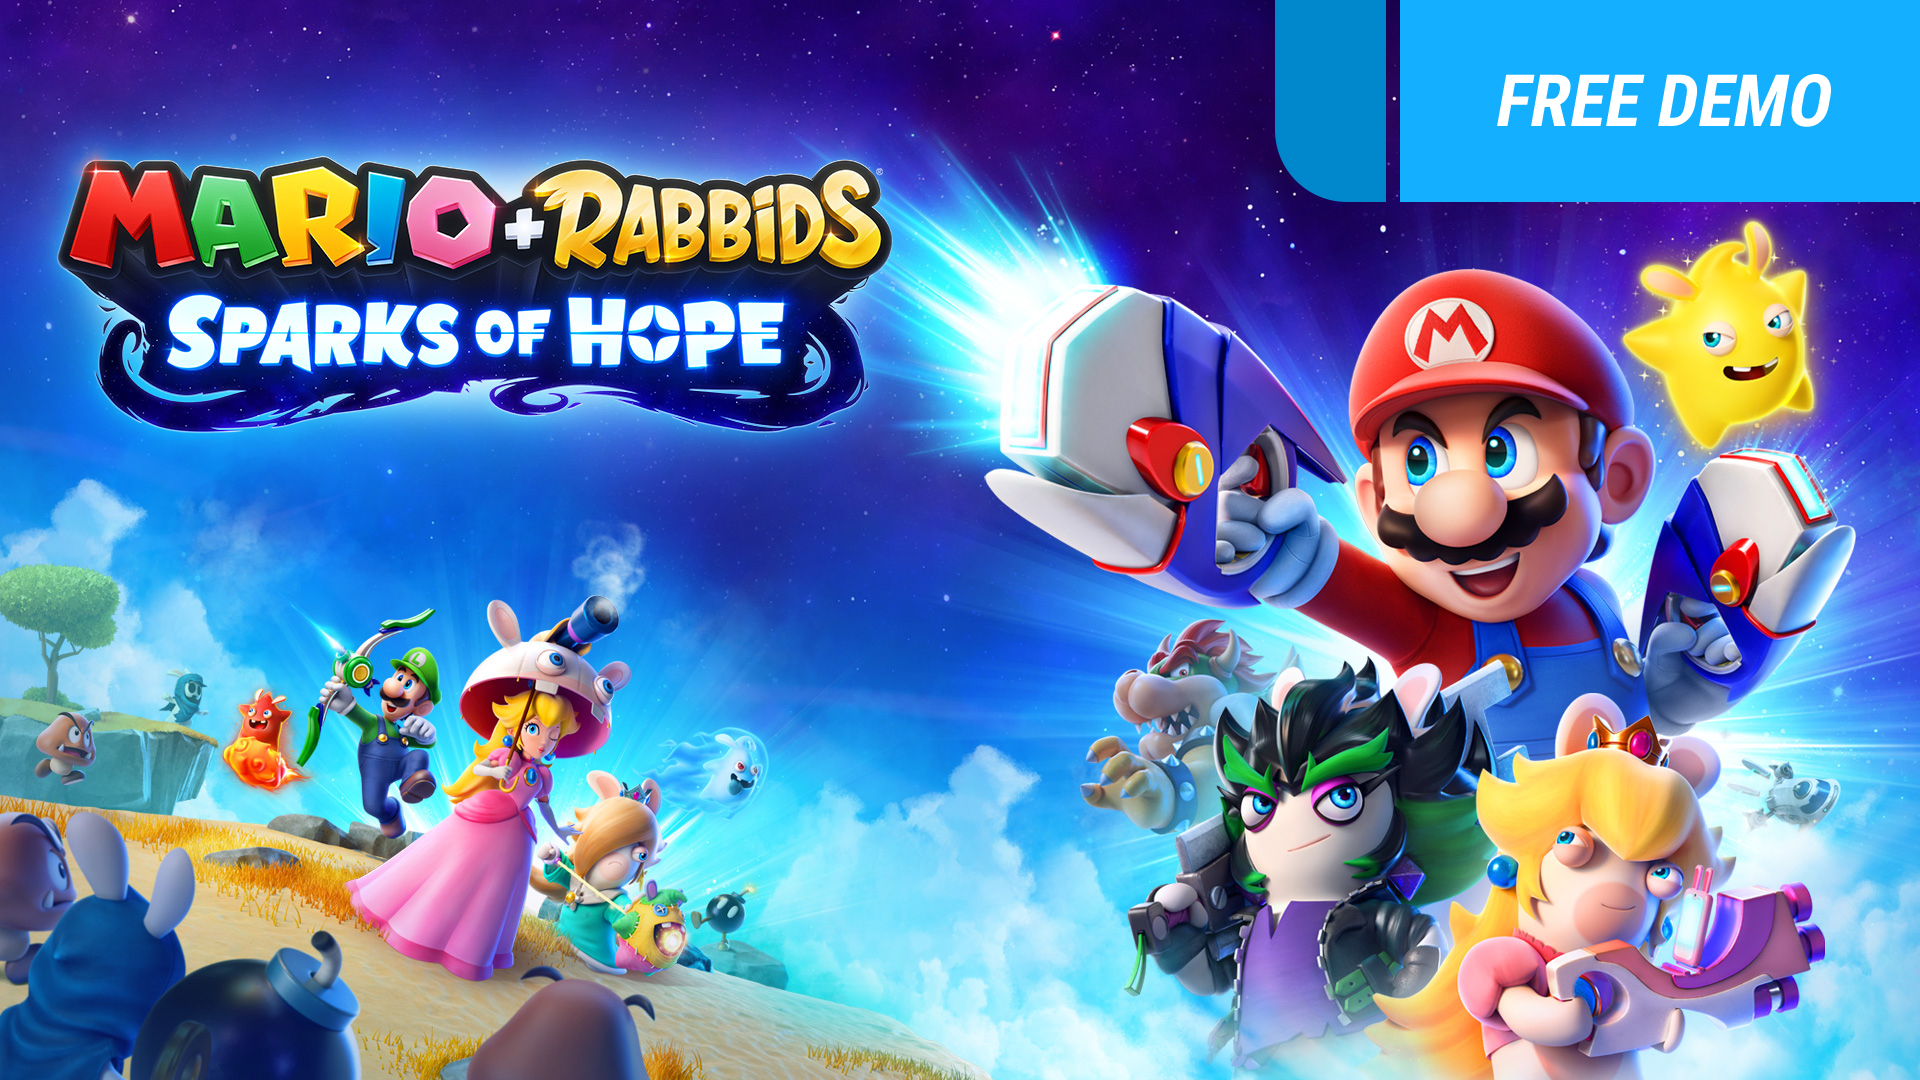 MARIO + RABBIDS SPARKS OF HOPE